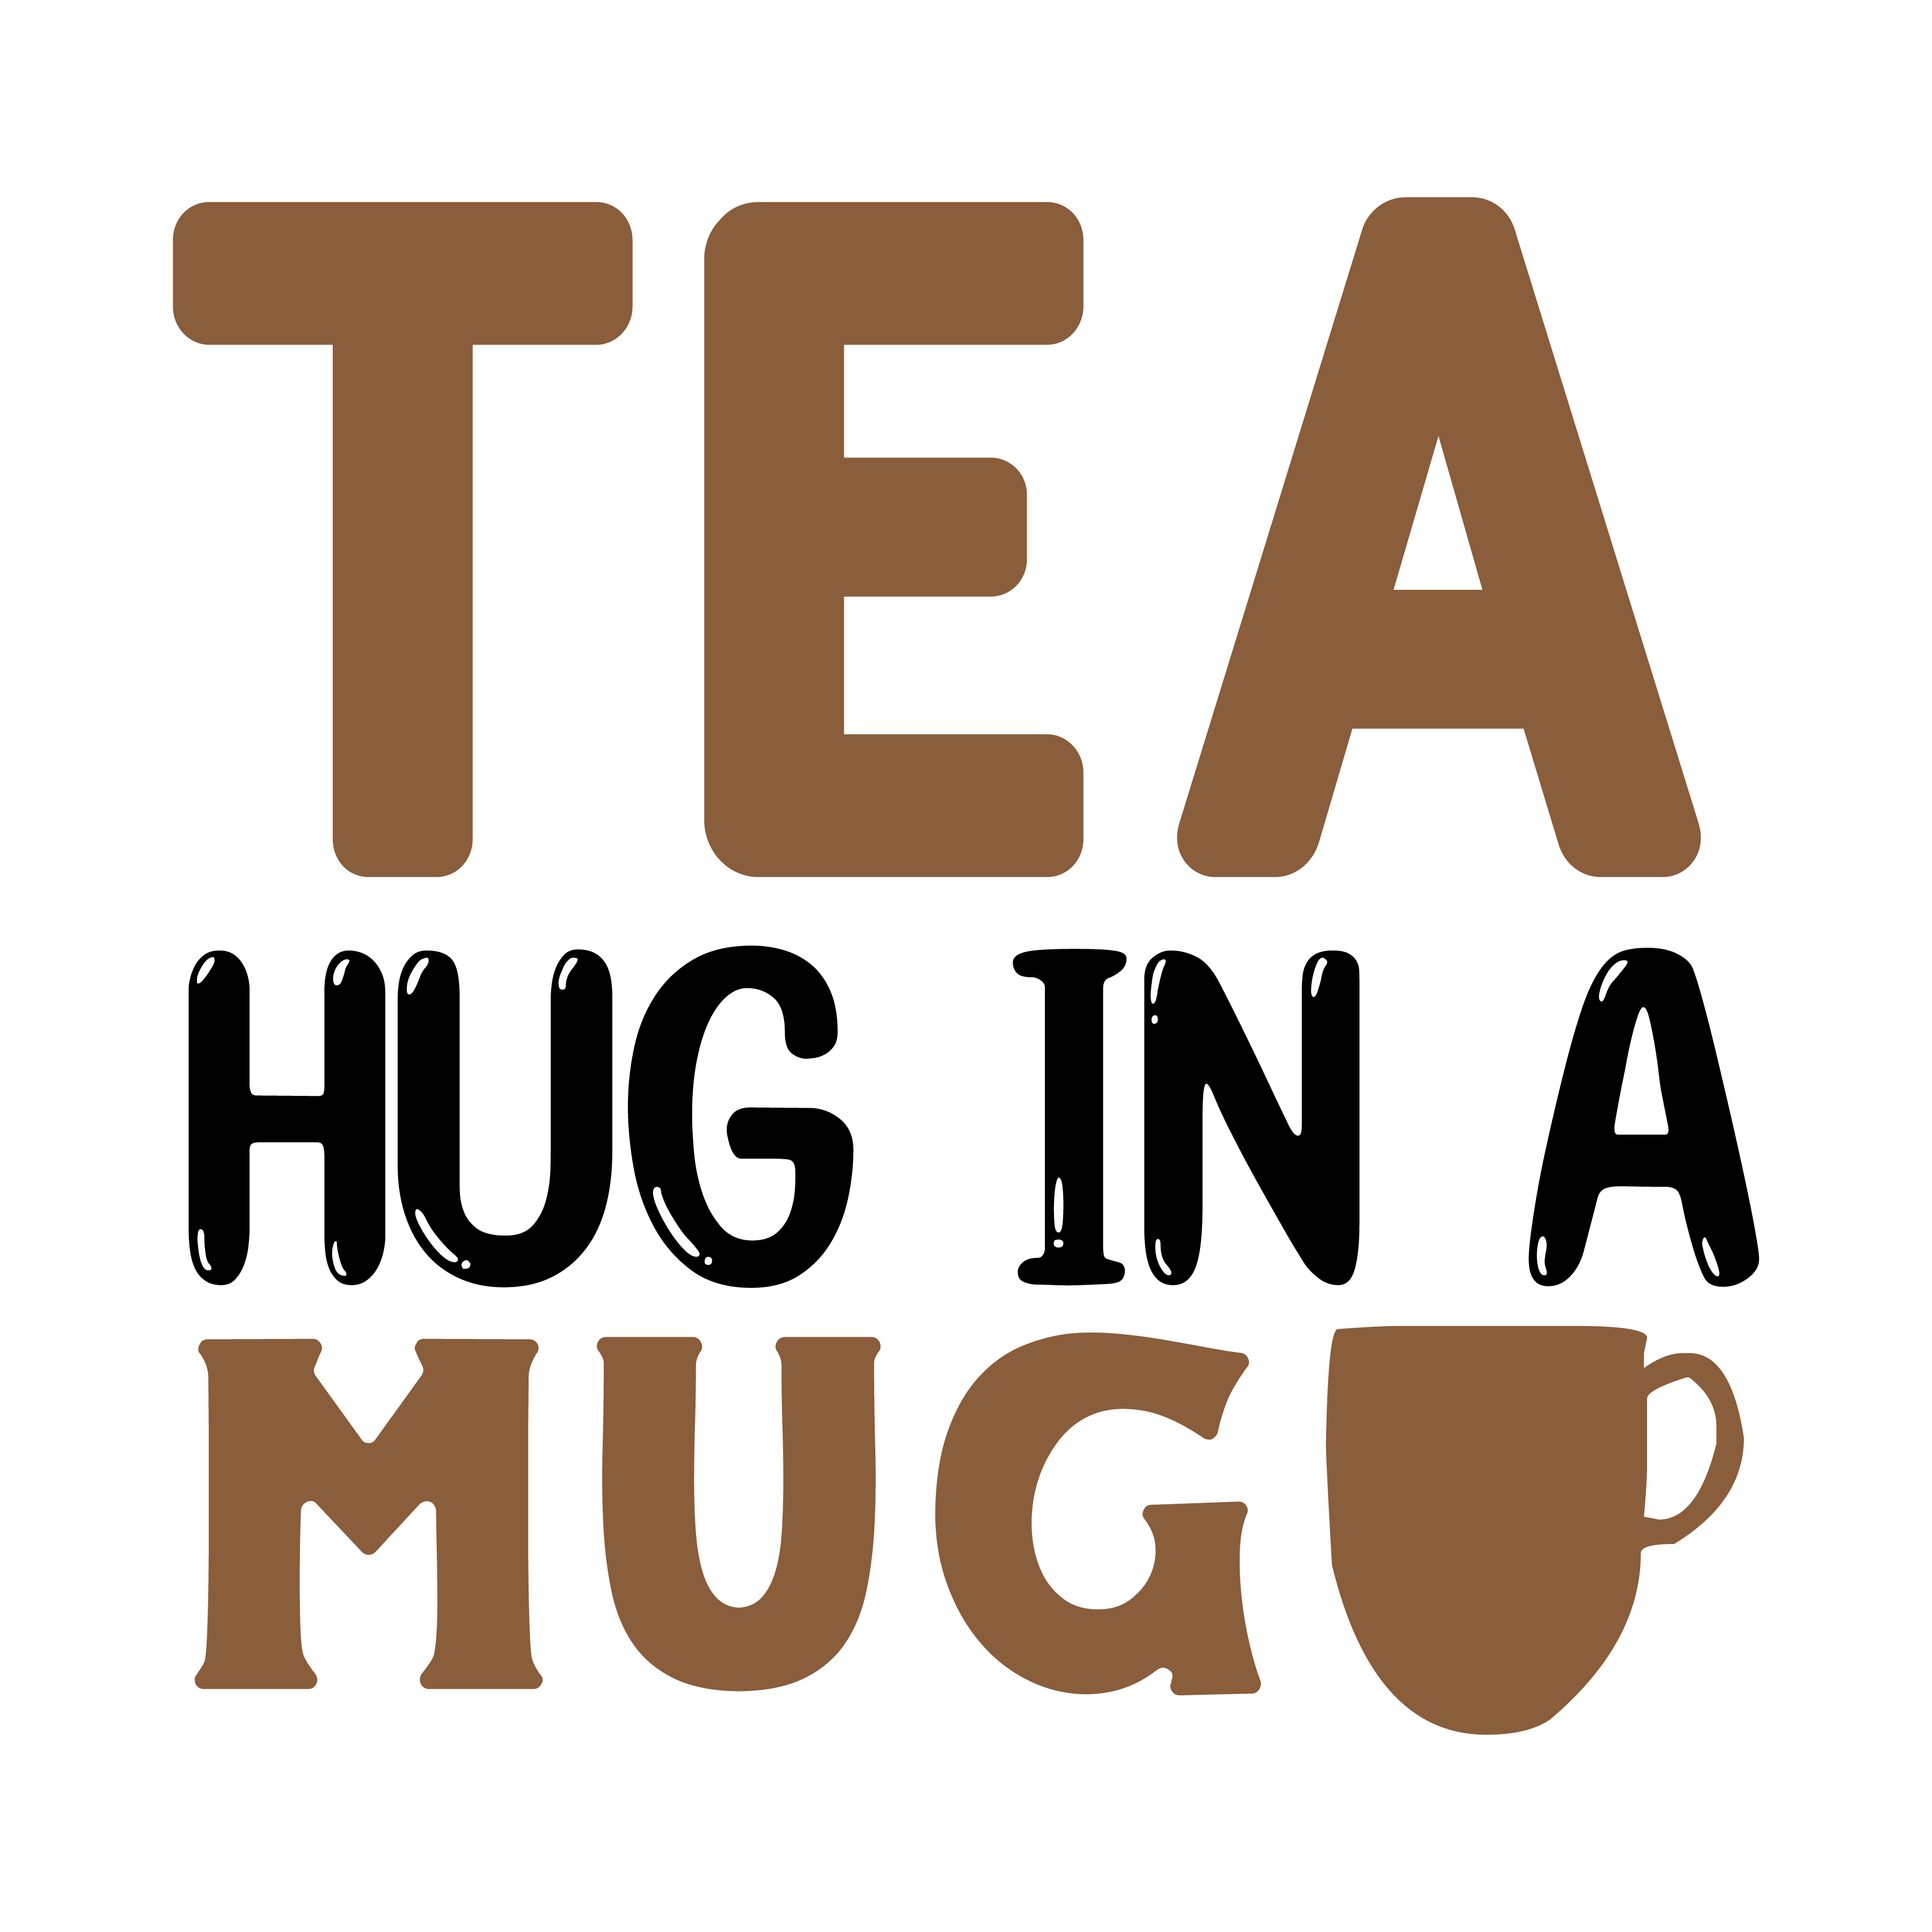 tea hug in a mug, tea sayings, tea quotes, Cricut designs, free, clip art, svg file, template, pattern, stencil, silhouette, cut file, design space, short, funny, shirt, cup, DIY crafts and projects, embroidery